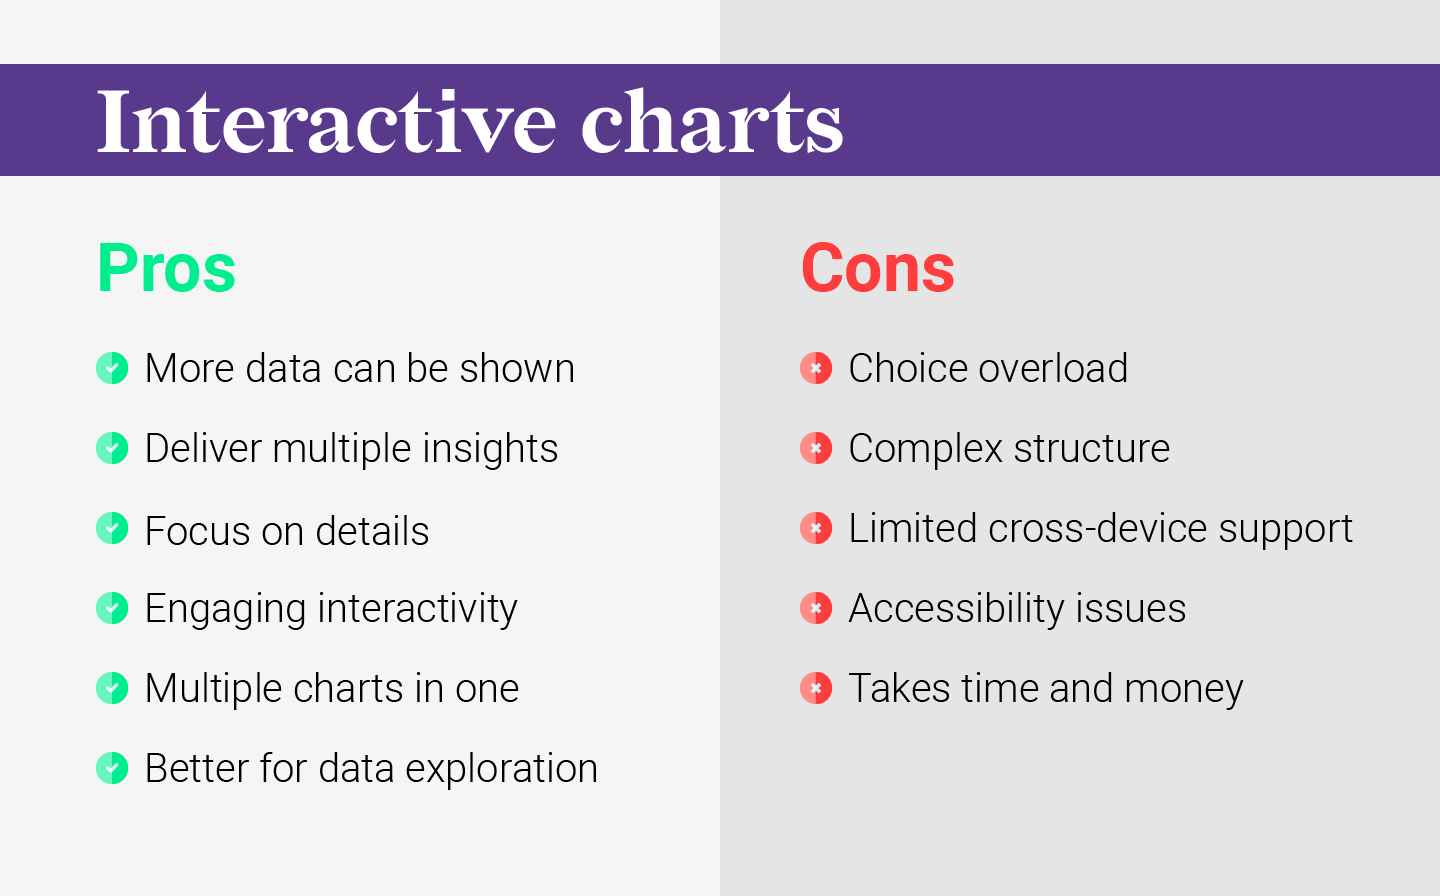 The table comparing the pros and cons of interactive charts. It's a summary of the whole paragraph above.